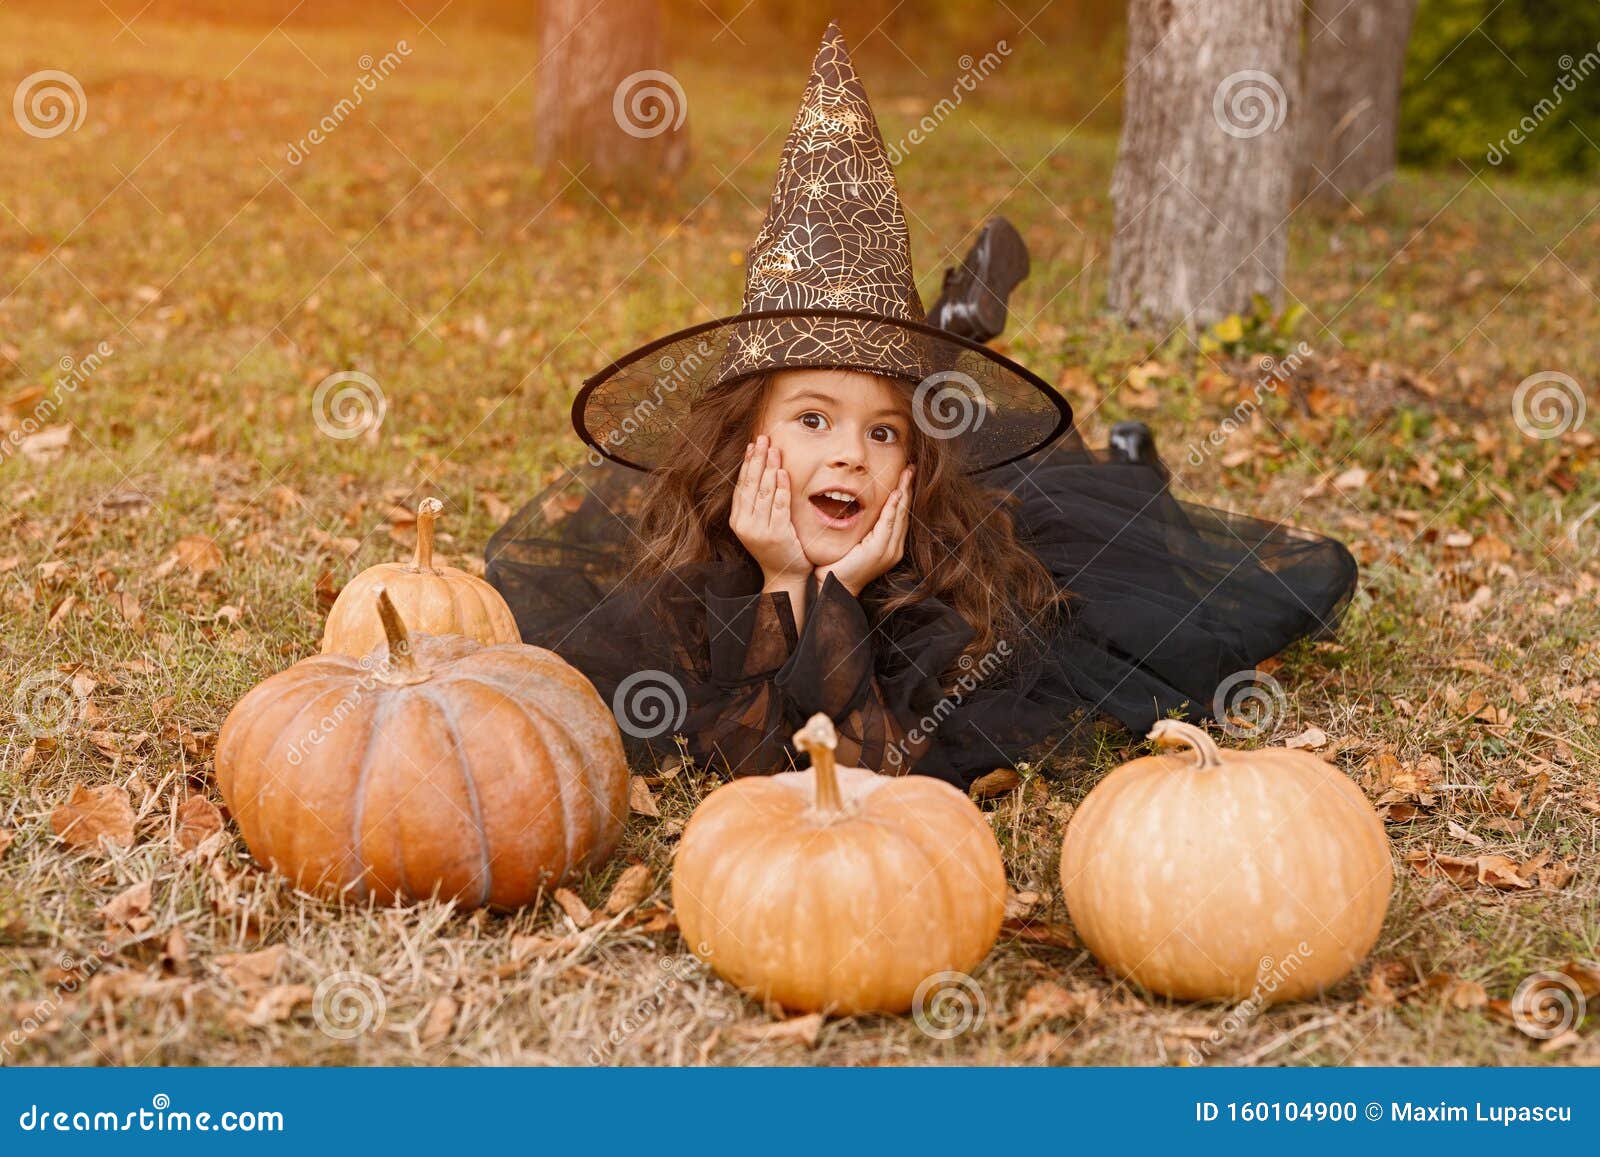 Cute Girl in Witch Costume Lying with Pumpkins Stock Photo - Image of ...